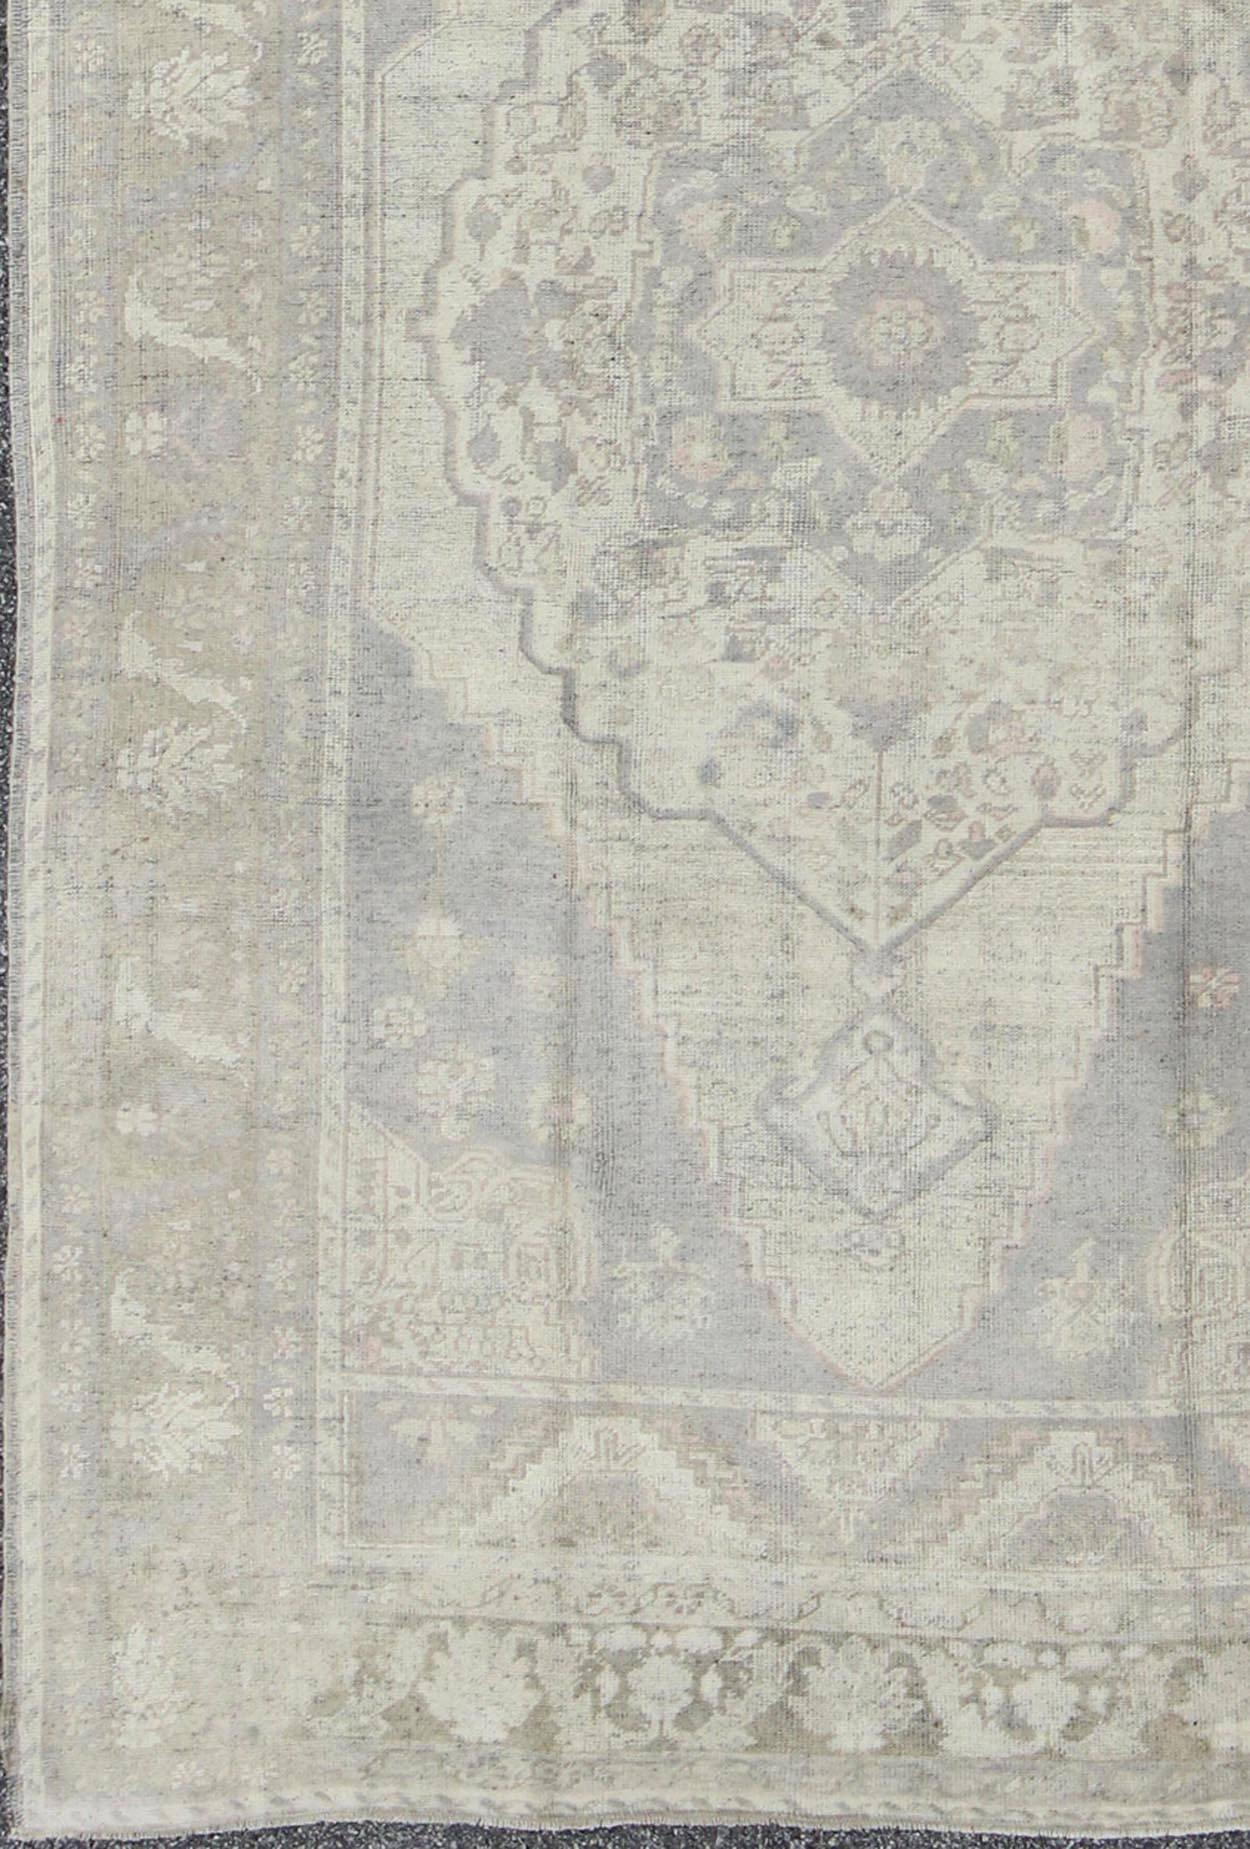 Vintage Oushak in Muted Colors of Gray, Taupe, Cream and Light Brown.
This softly muted Oushak carpet rests beautifully upon a field of elegant grey and taupe. A large medallion takes center stage and is well balanced by four prominent organic